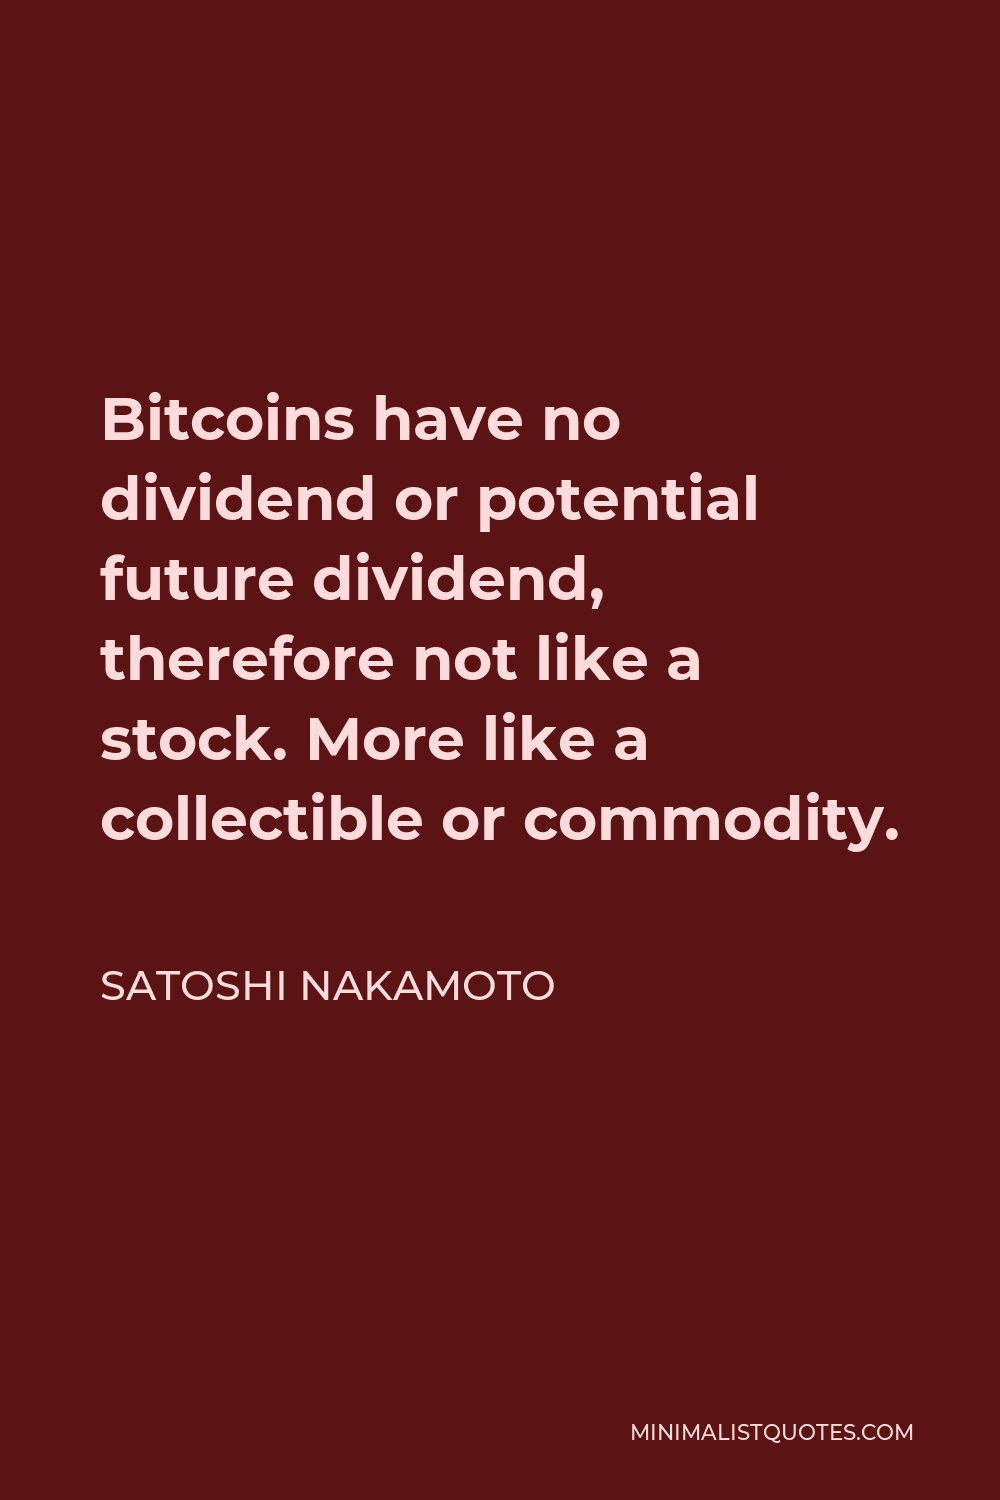 Satoshi Nakamoto Quote - Bitcoins have no dividend or potential future dividend, therefore not like a stock. More like a collectible or commodity.